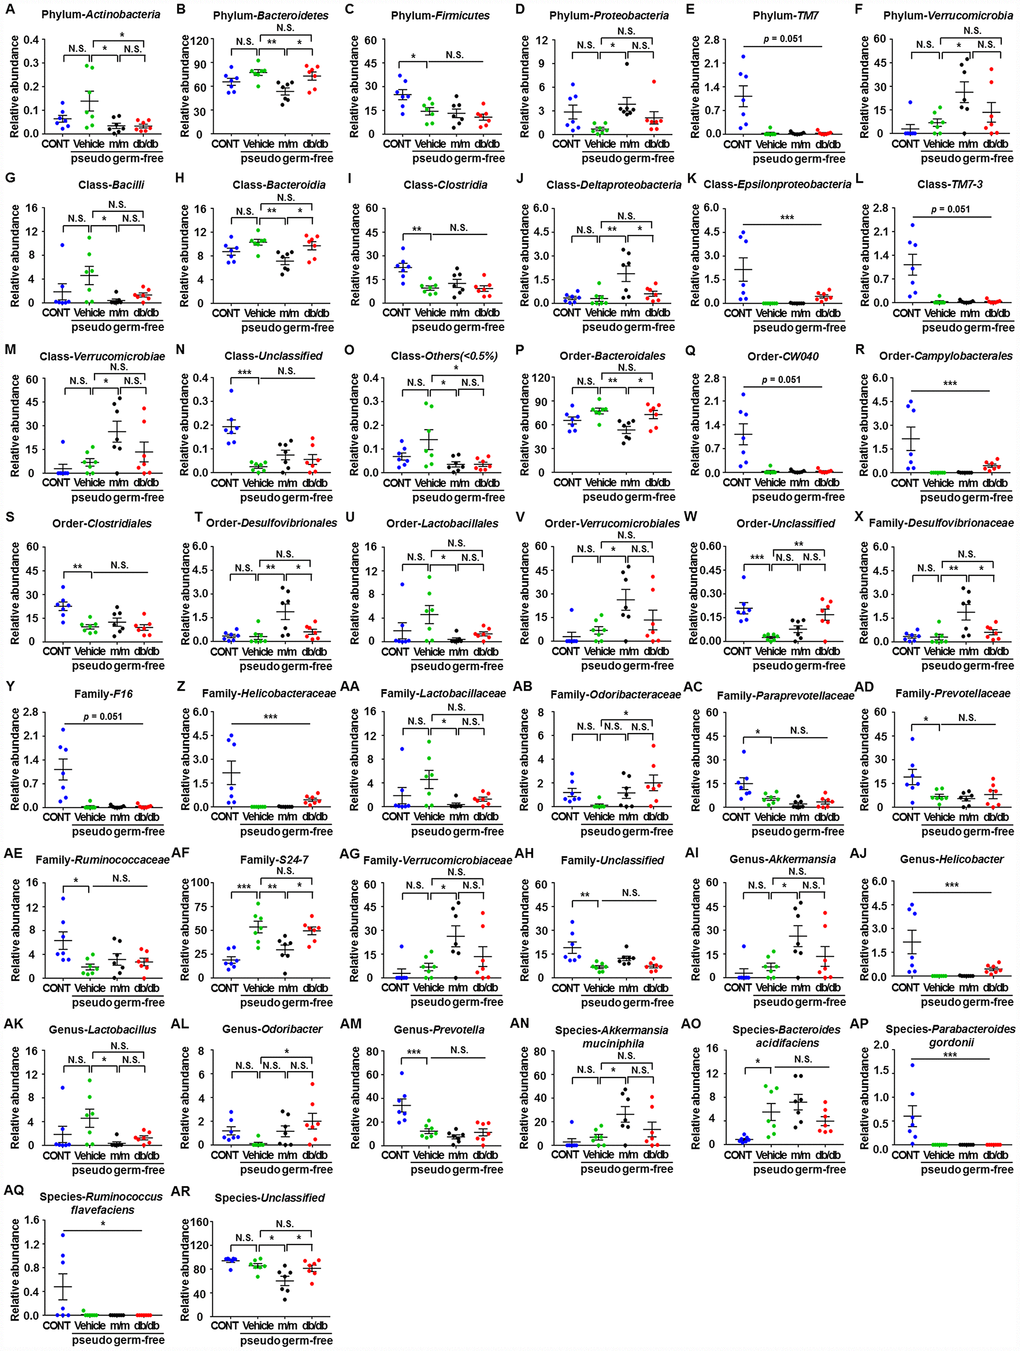 Differences in the relative abundances of gut microbiota composition among pseudo-germ-free mice after transplantation from db/db and m/m mice. (A) Phylum Actinobacteria (F3,24 = 4.607, P B) Phylum Bacteroidetes (F3,24 = 5.458, P C) Phylum Firmicutes (F3,24 = 5.936, PD) Phylum Proteobacteria (F3,24 = 3.204, PE) Phylum TM7 (Fisher’s exact test; P=0.051); (F) Phylum Verrucomicrobia (F3,24 = 4.348, P G) Class Bacilli (F3,24 = 2.968, P = 0.0521); (H) Class Bacteroidia (F3,24 = 5.465, PI) Class Clostridia (F3,24 = 8.279, P J) Class Deltaproteobacteria (F3,24 = 7.044, P K) Class Epsilonproteobacteria (Fisher’s exact test; PL) Class TM7-3 (Fisher’s exact test; P = 0.051); (M) Class Verrucomicrobiae (F3,24 = 4.348, P N) Class Unclassified (F3,24 = 12.87, P O) Class Others (3,24 = 4.388, P P) Order Bacteroidales (F3,24 = 5.465, P Q) Order CW040 (F3,24 = 12.36, P R) Order Campylobacterales (Fisher’s exact test; P S) Order Clostridiales (F3,24 = 8.316, P T) Order Desulfovibrionales (F3,24 = 7.044, P U) Order Lactobacillales (F3,24 = 2.97, P=0.0520); (V) Order Verrucomicrobiales (F3,24 = 4.348, P W) Order Unclassified (F3,24 = 9.449, PX) Family Desulfovibrionaceae (F3,24 = 7.044, P Y) Family F16 (F3,24 = 12.36, P Z) Family Helicobacteraceae (Fisher’s exact test; P AA) Family Lactobacillaceae (F3,24 = 3.018, PAB) Family Odoribacteraceae (F3,24 = 3.087, PAC) Family Paraprevotellaceae (F3,24 = 7.505, P AD) Family Prevotellaceae (F3,24 = 4.557, P AE) Family Ruminococcaceae (F3,24 = 4.012, P AF) Family S24-7 (F3,24 = 11.79, P AG) Family Verrucomicrobiaceae (F3,24 = 4.348, P AH) Family Unclassified (F3,24 = 7.609, P AI) Genus Akkermansia (F3,24 = 4.348, P AJ) Genus Helicobacter (Fisher’s exact test; P AK) Genus Lactobacillus (F3,24 = 3.018, PAL) Genus Odoribacter (F3,24 = 3.087, P AM) Genus Prevotella (F3,24 = 12.57, P AN) Species Akkermansia muciniphila (F3,24 = 4.348, P AO) Species Bacteroides acidifaciens (F3,24 = 6.558, P AP) Species Parabacteroides gordonii (Fisher’s exact test; P AQ) Species Ruminococcus flavefaciens (Fisher’s exact test; P AR) Species Unclassified (F3,24 = 7.505, P PPP